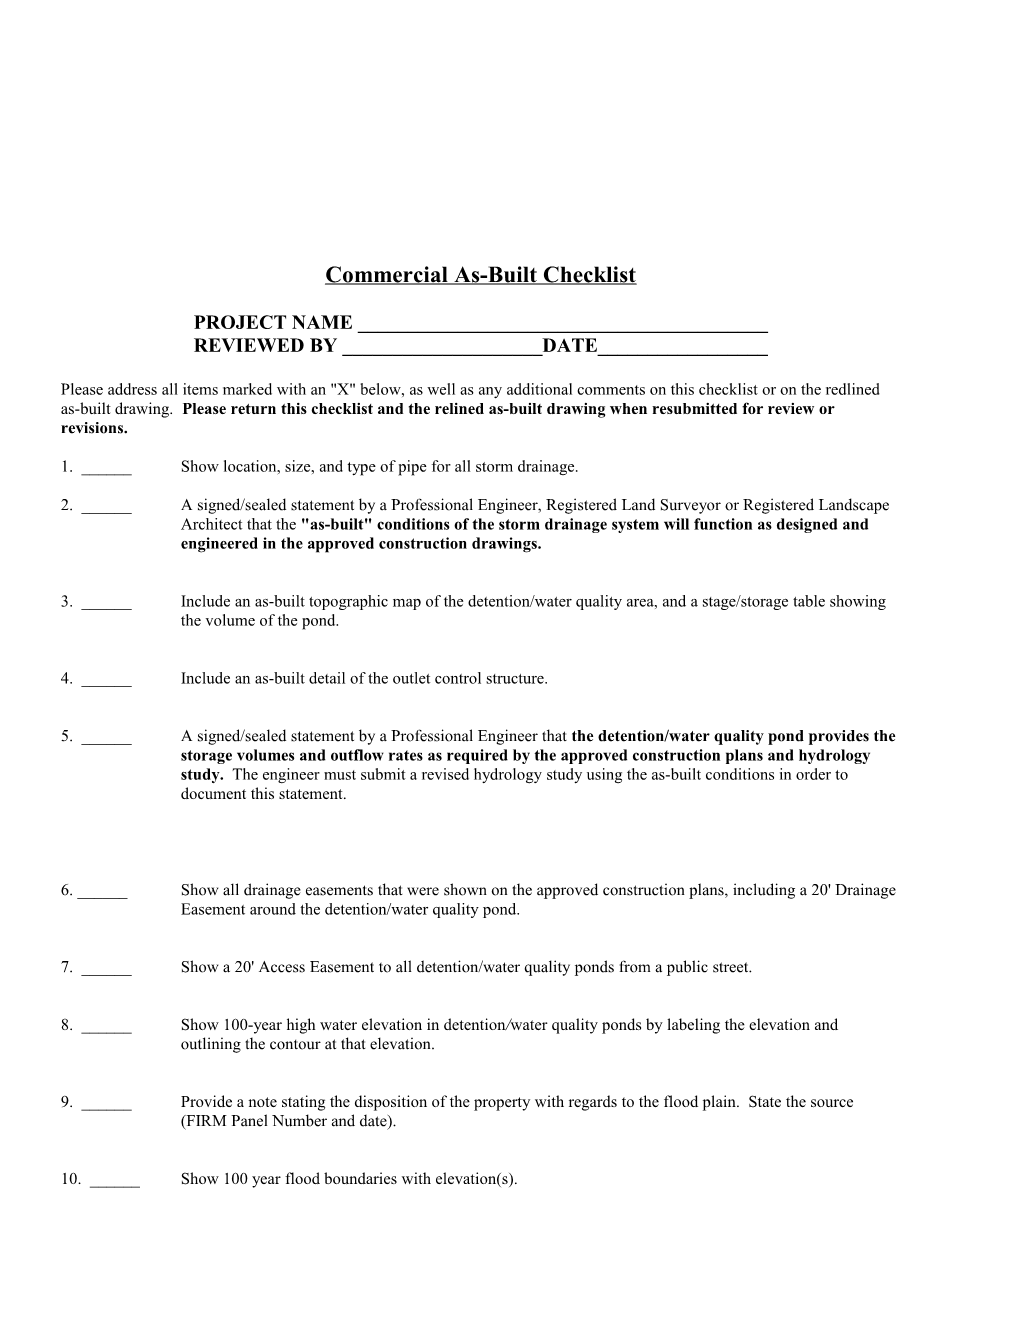 Commercial As-Built Checklist